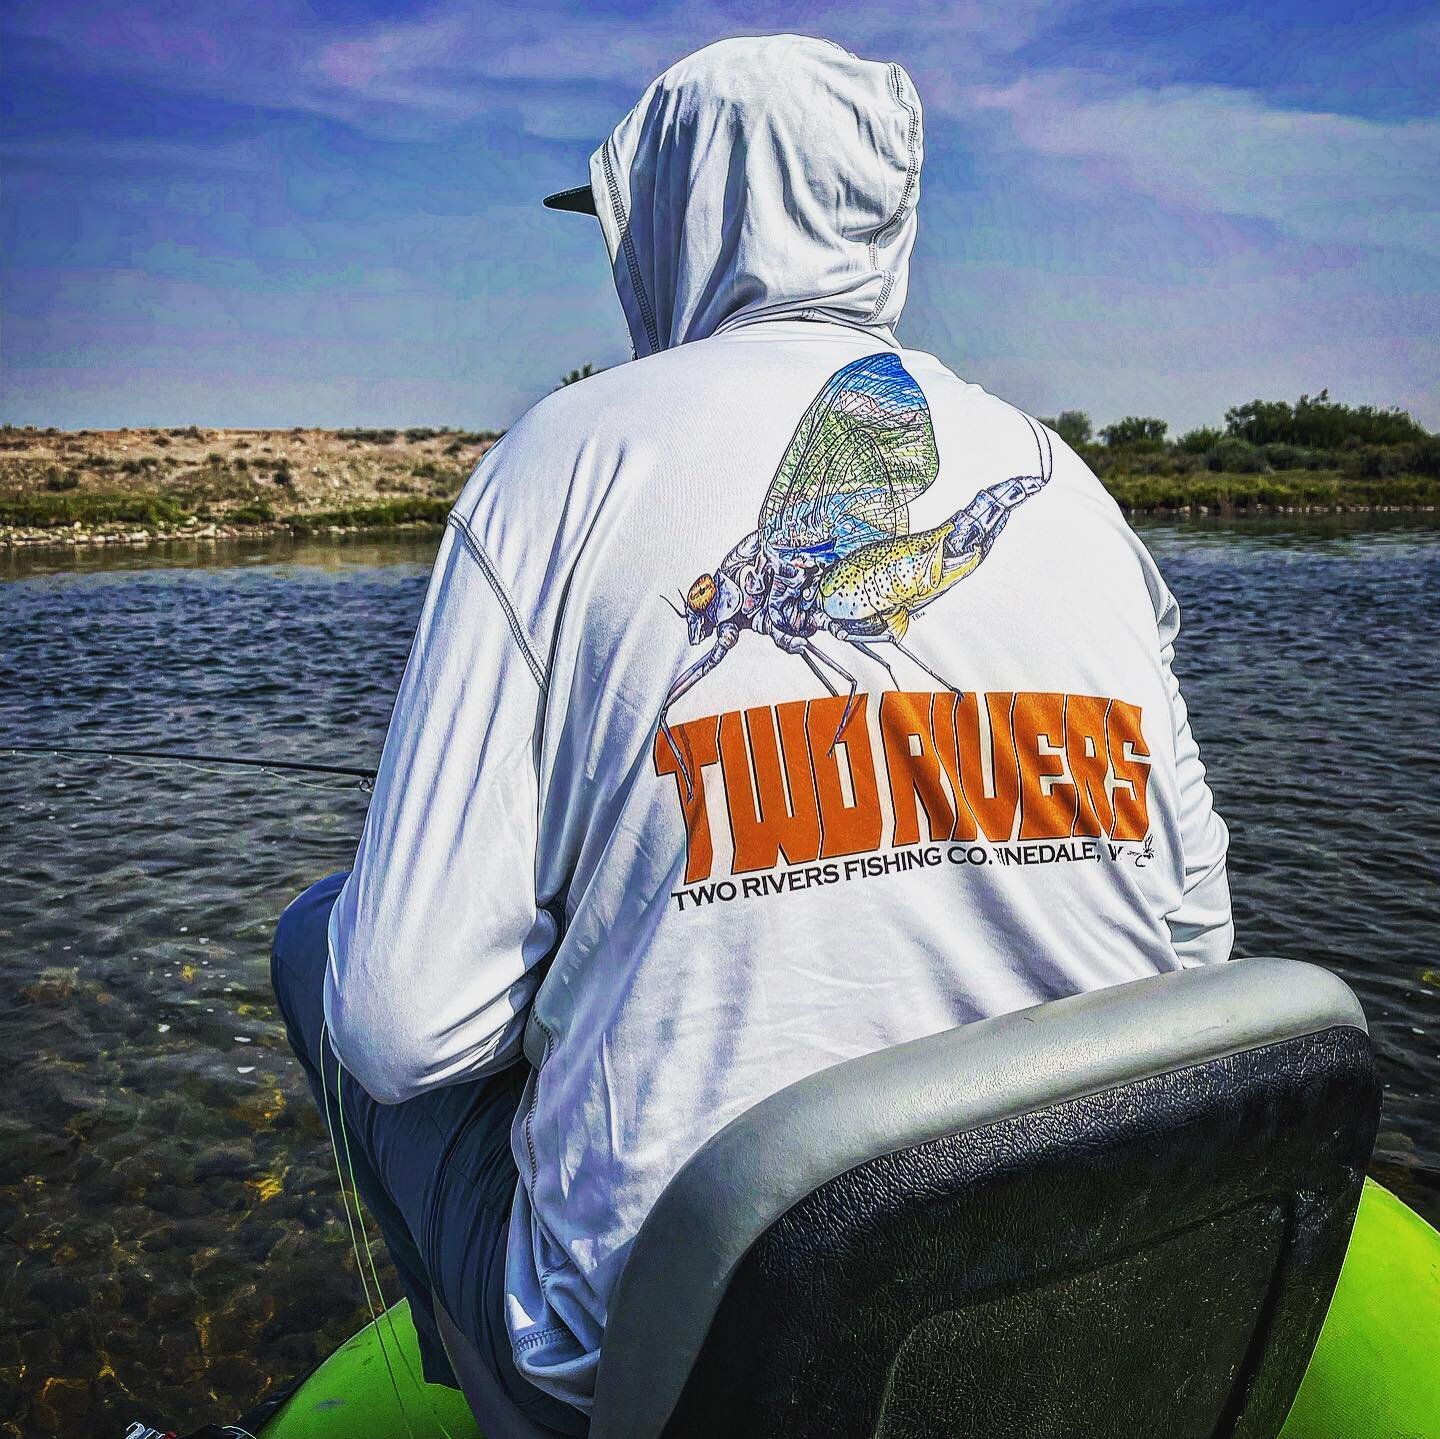 This little project turned out a success. Thanks to @wyotrouthunters and Two Rivers Fishing Co. in Pinedale for the opportunity to customize some stuff for you! It was definitely a challenge and a one of a kind logo for sure! 
And, as usual, I&rsquo;